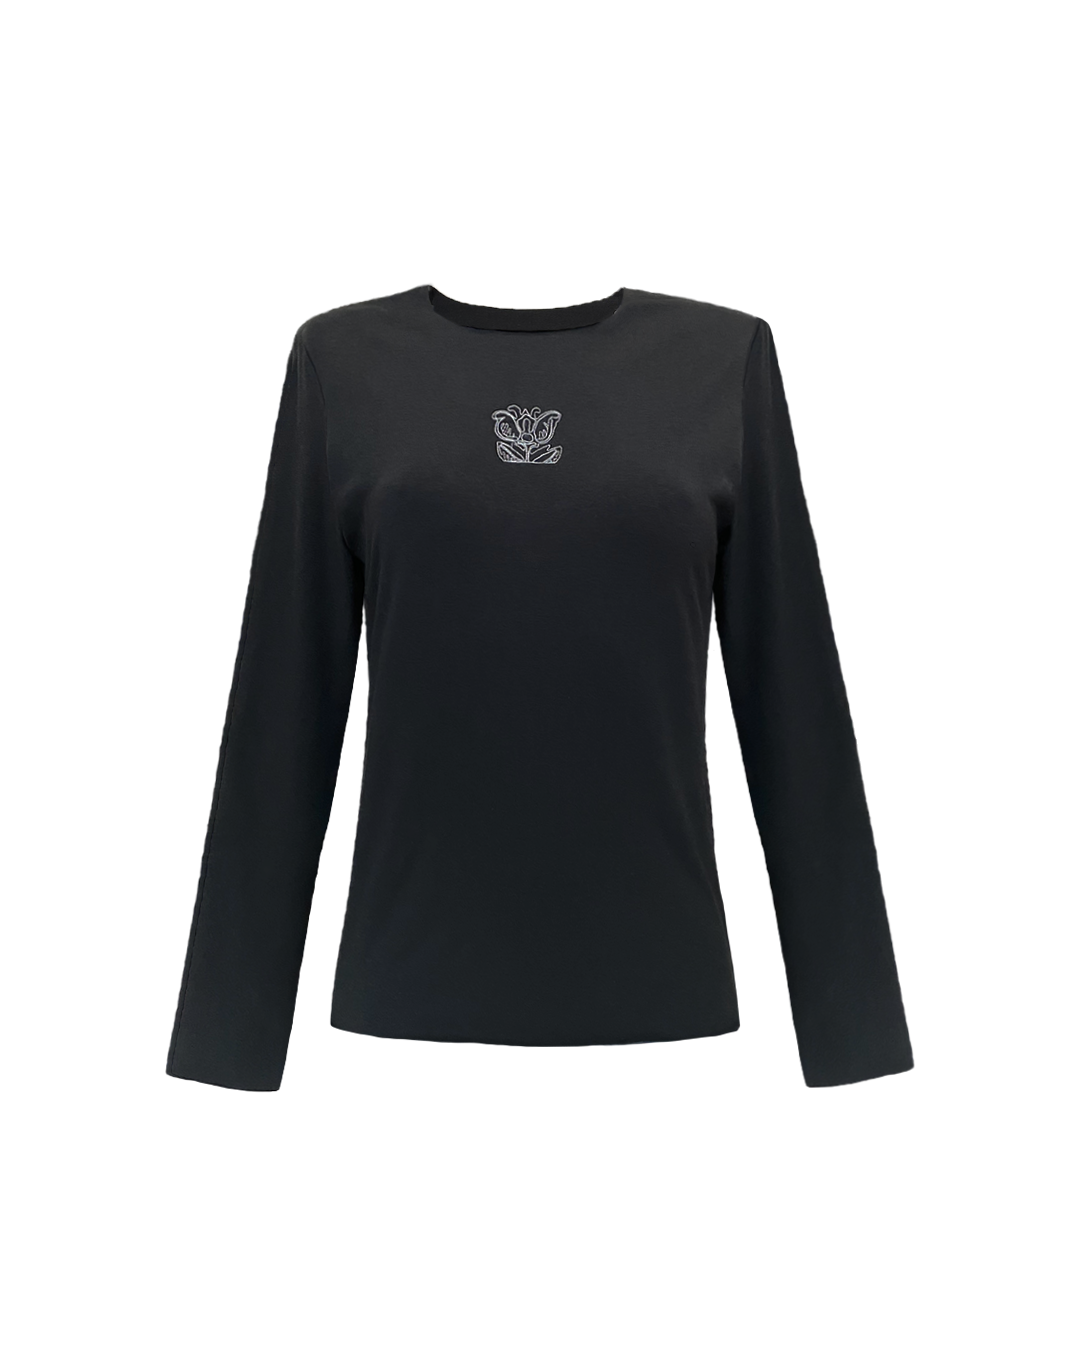 ORGANIC COTTON LONG-SLEEVE TOP IN CHARCOAL COLOUR